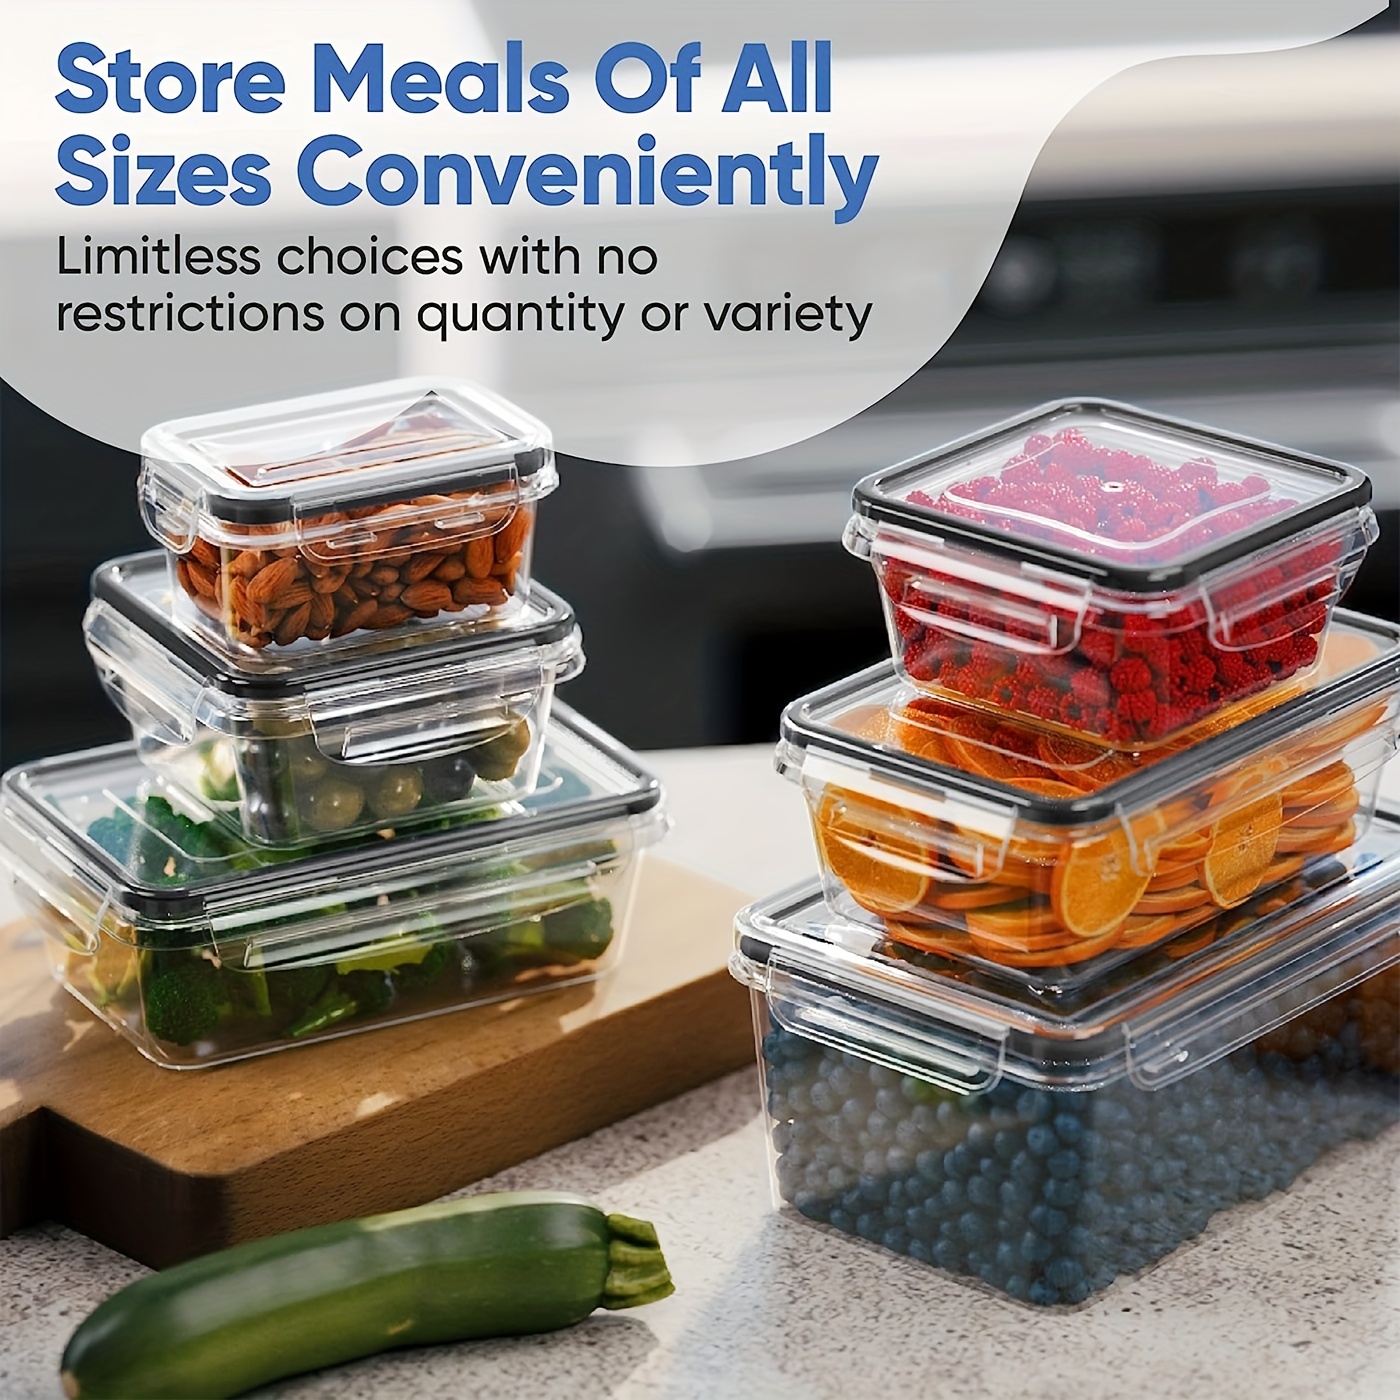 24 Food Storage Products That Preserve Freshness